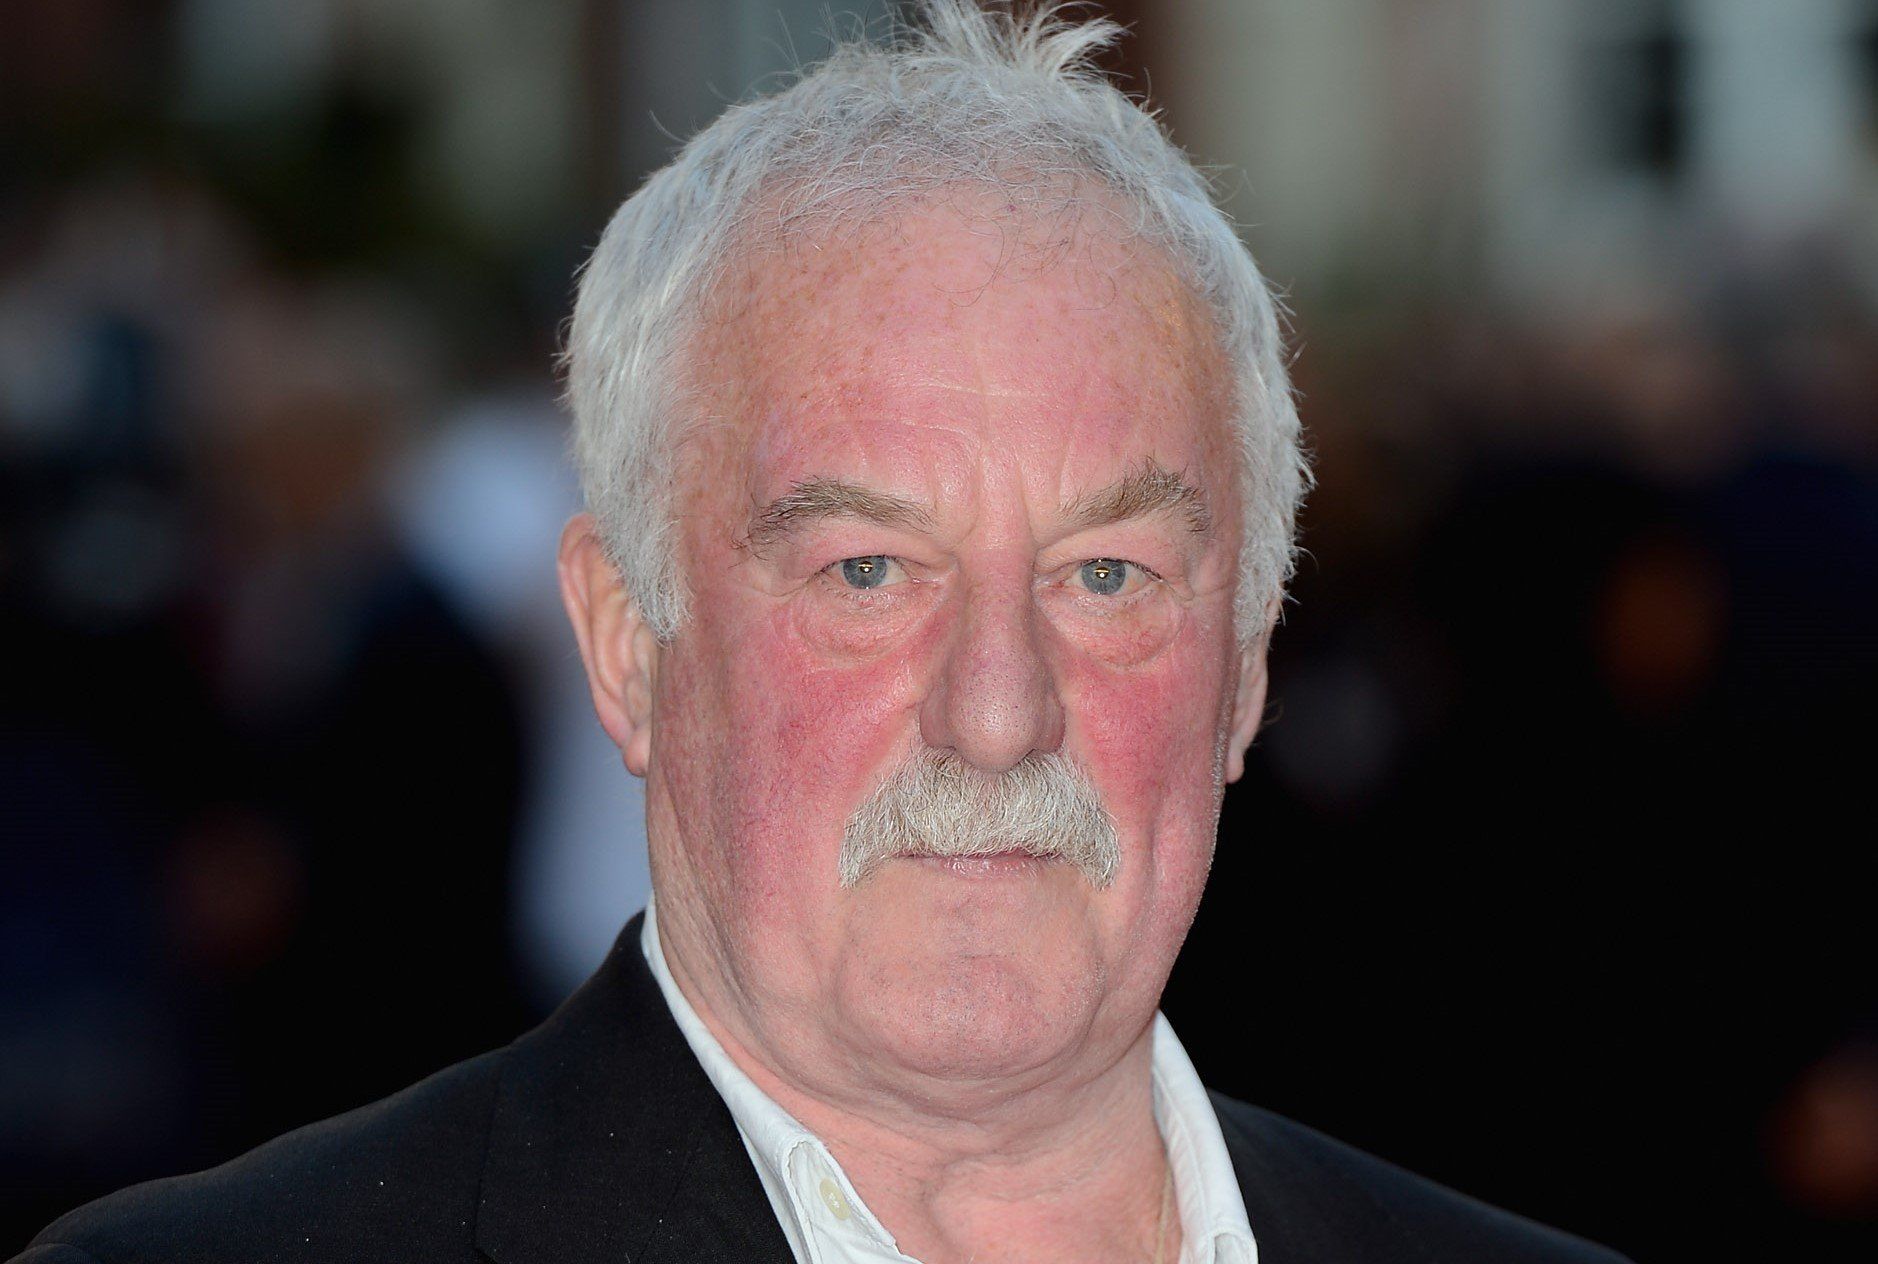 elijah wood leads tributes as the lord of the rings star bernard hill dies aged 79